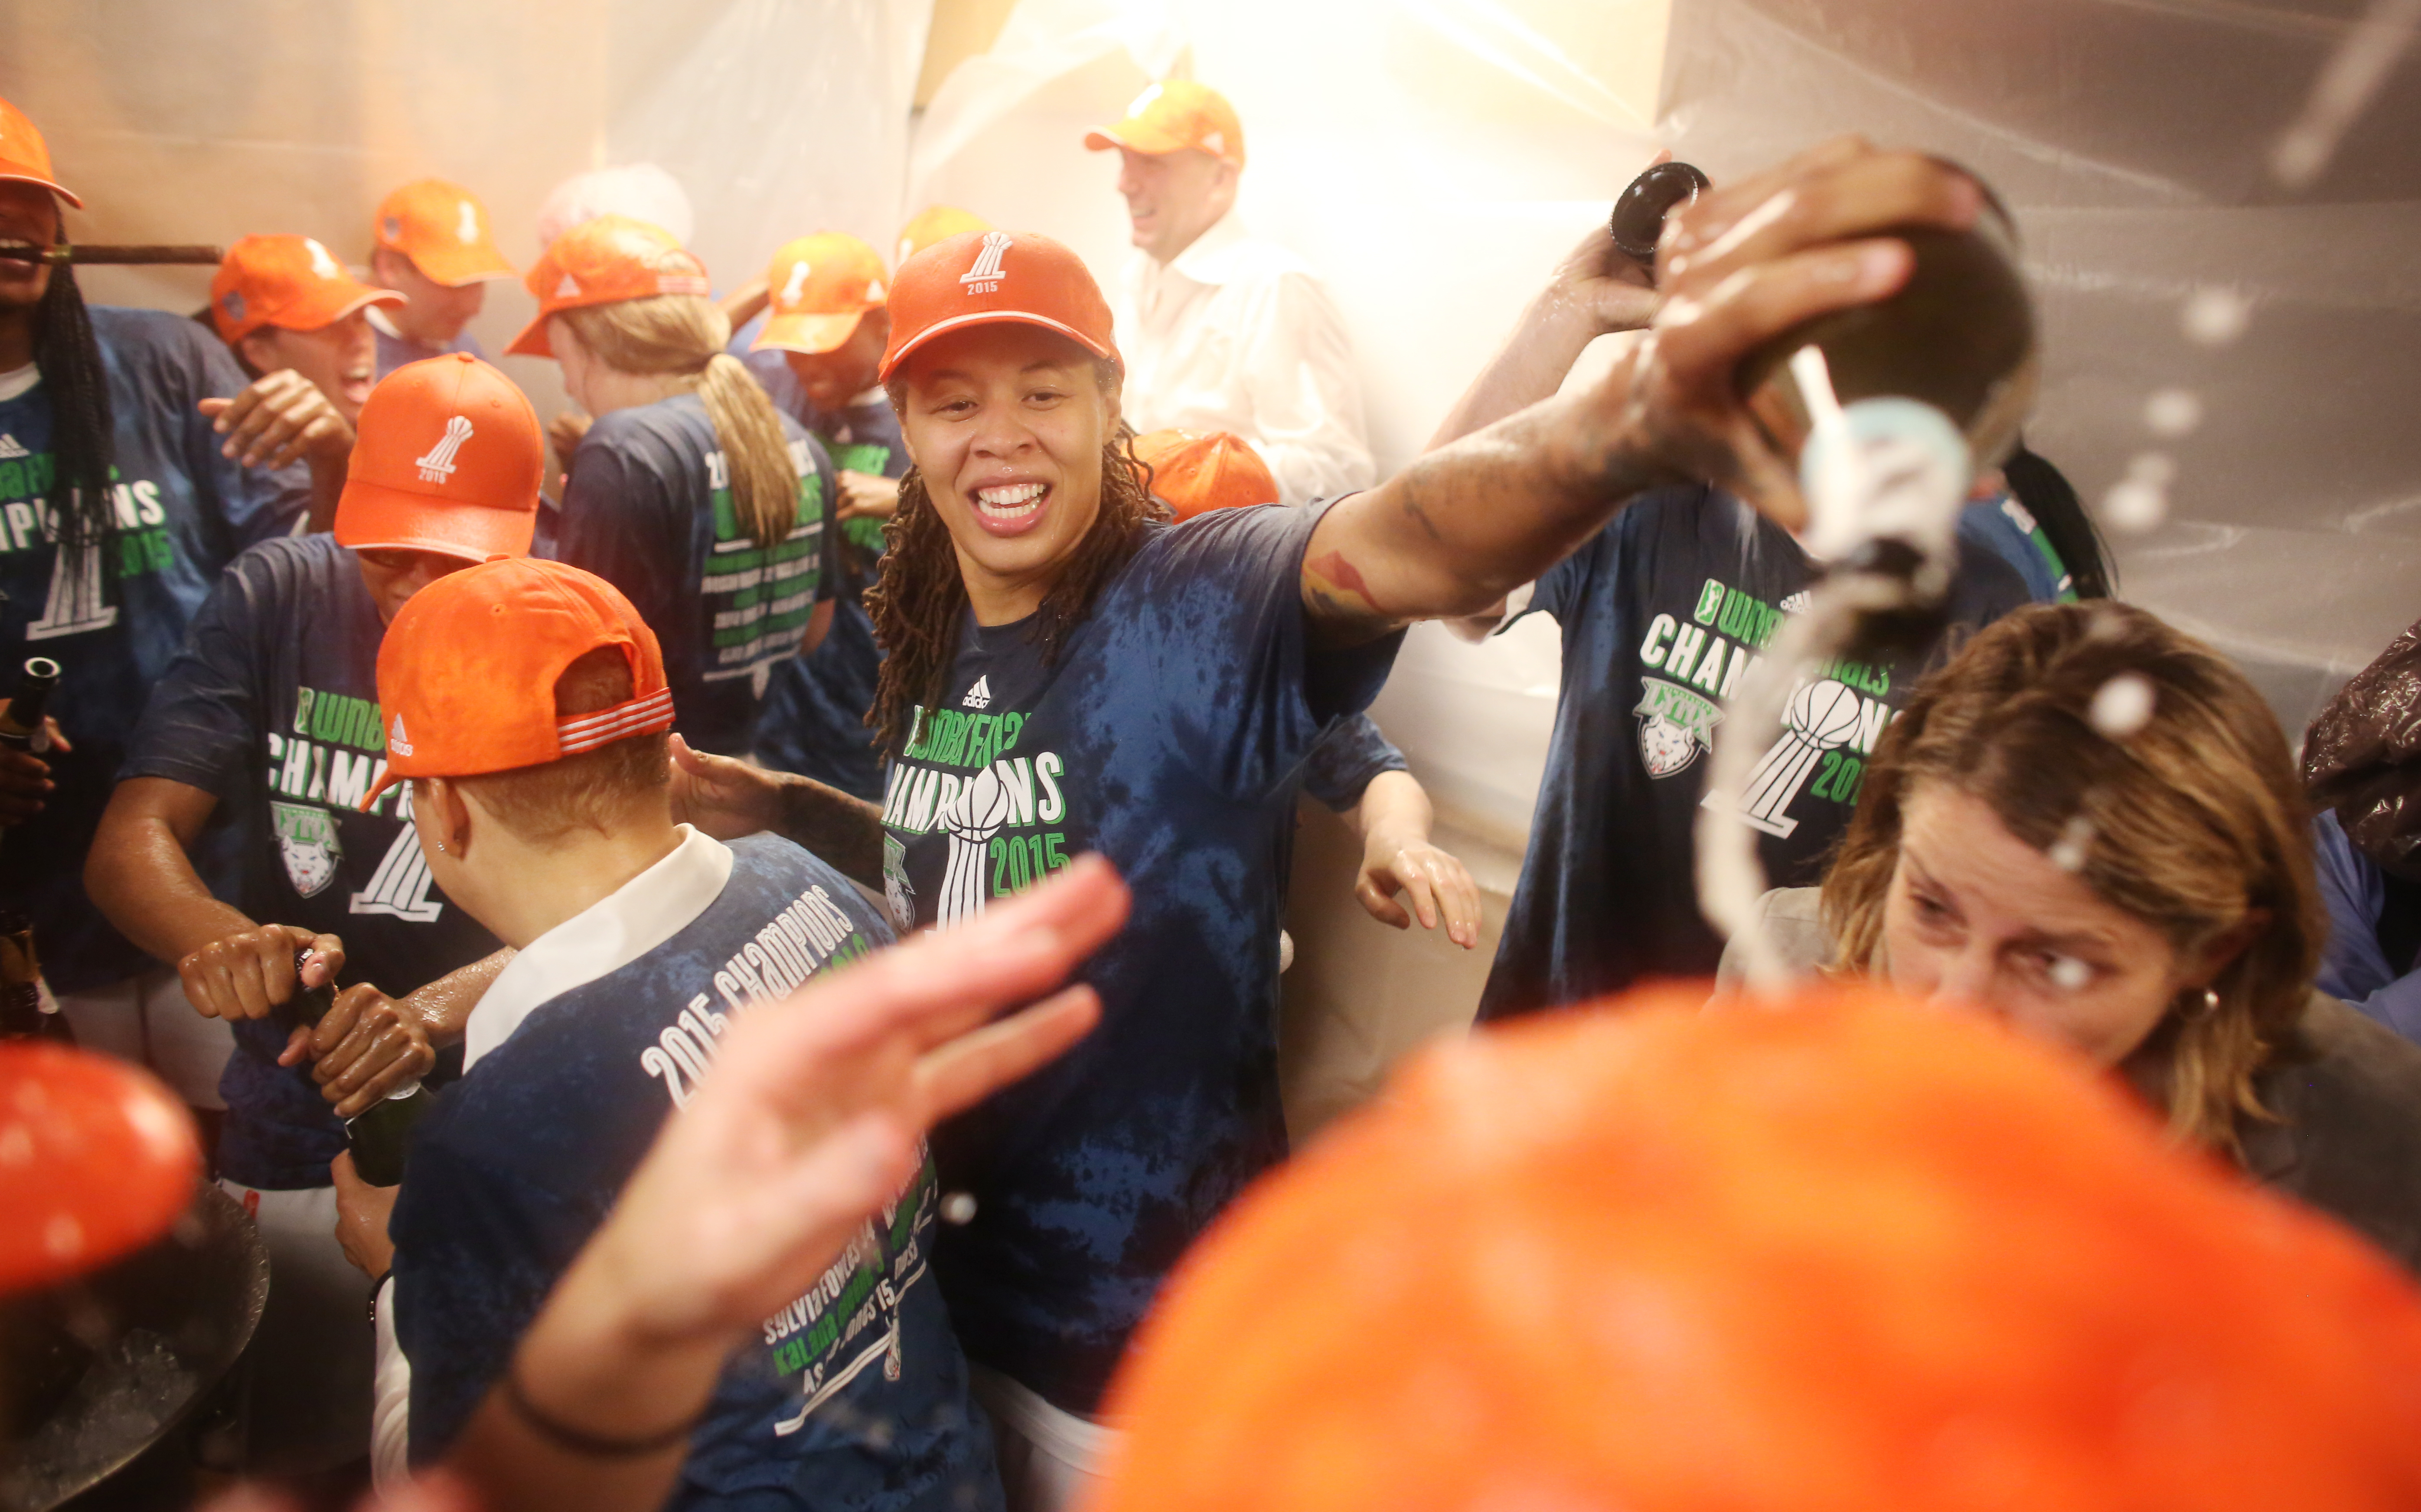 The Minnesota Lynx celebrate winning the WNBA title.   ] (KYNDELL HARKNESS/STAR TRIBUNE) kyndell.harkness@startribune.com  Game 5 of the WNBA finals Lynx vs Indiana at the Target Center in Minneapolis, Min., Wednesday October 14,  2015.